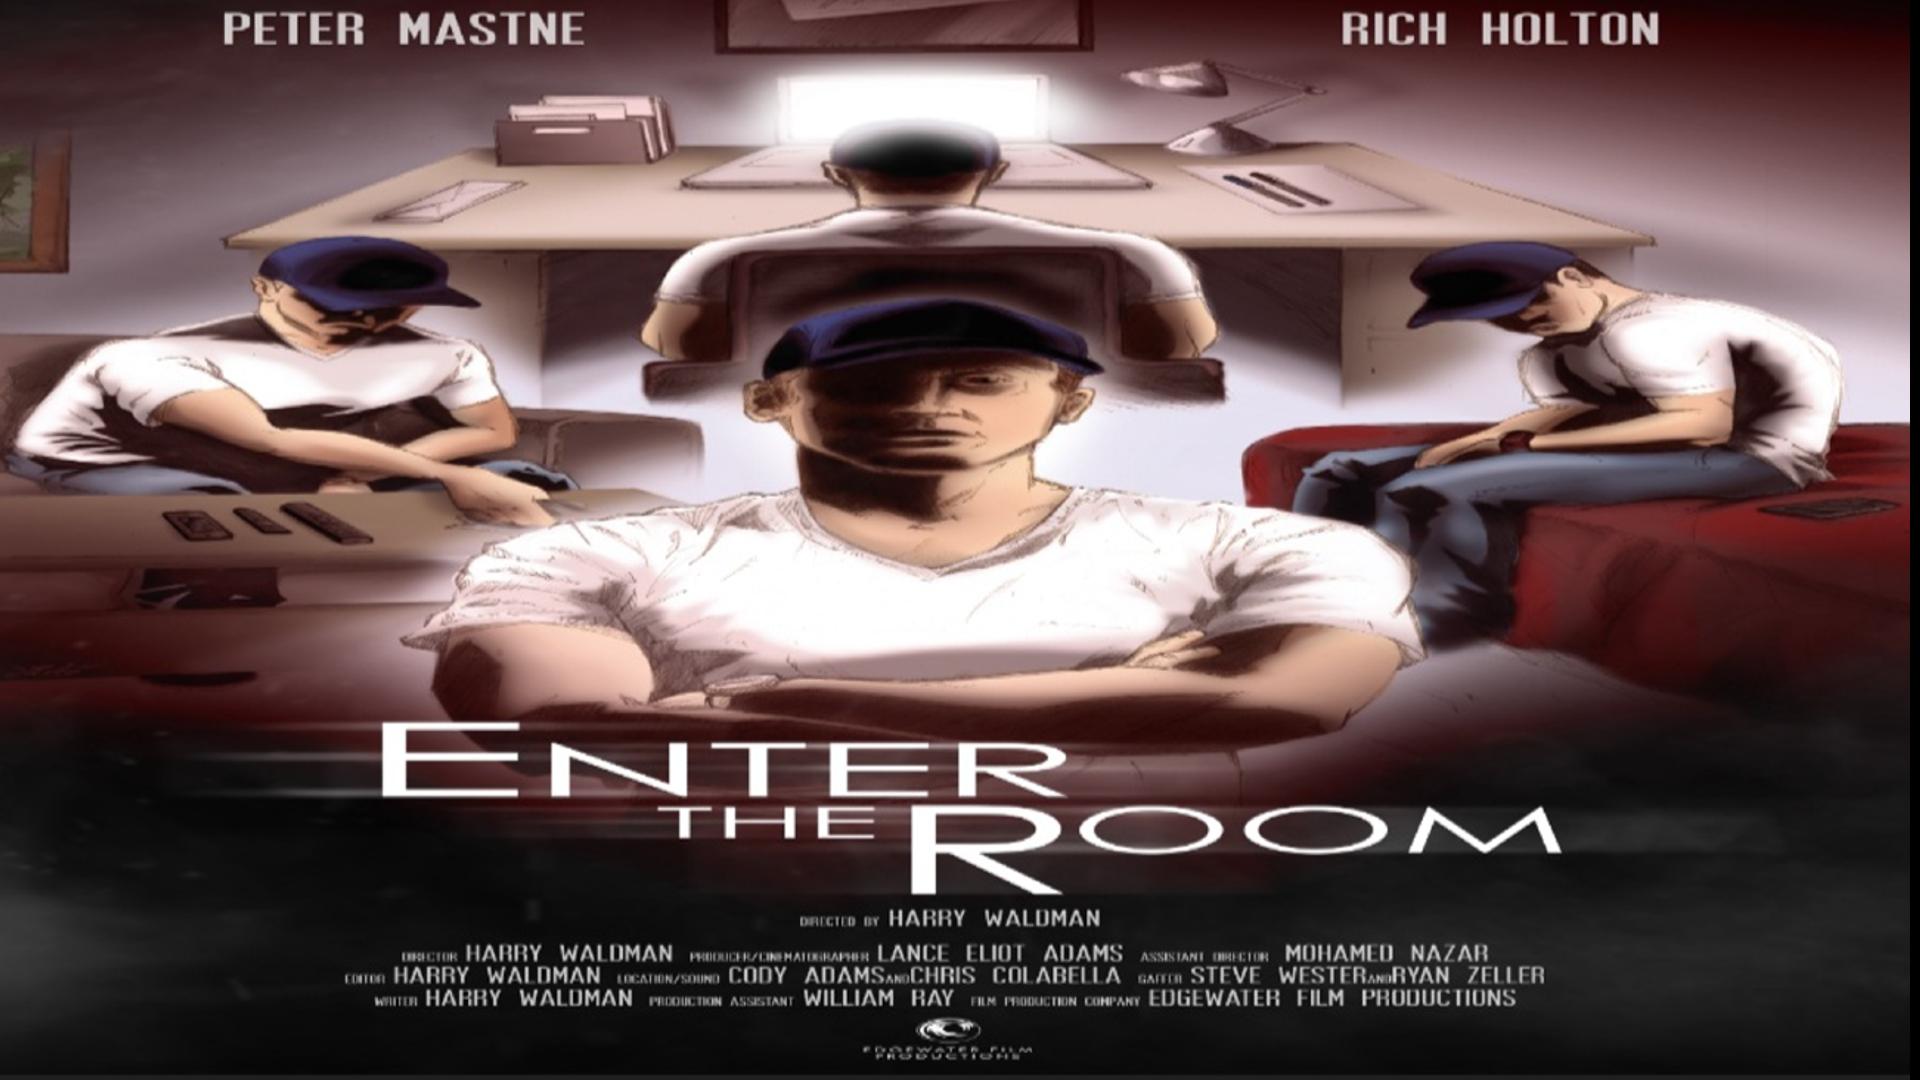 "Enter the Room" Screenplay